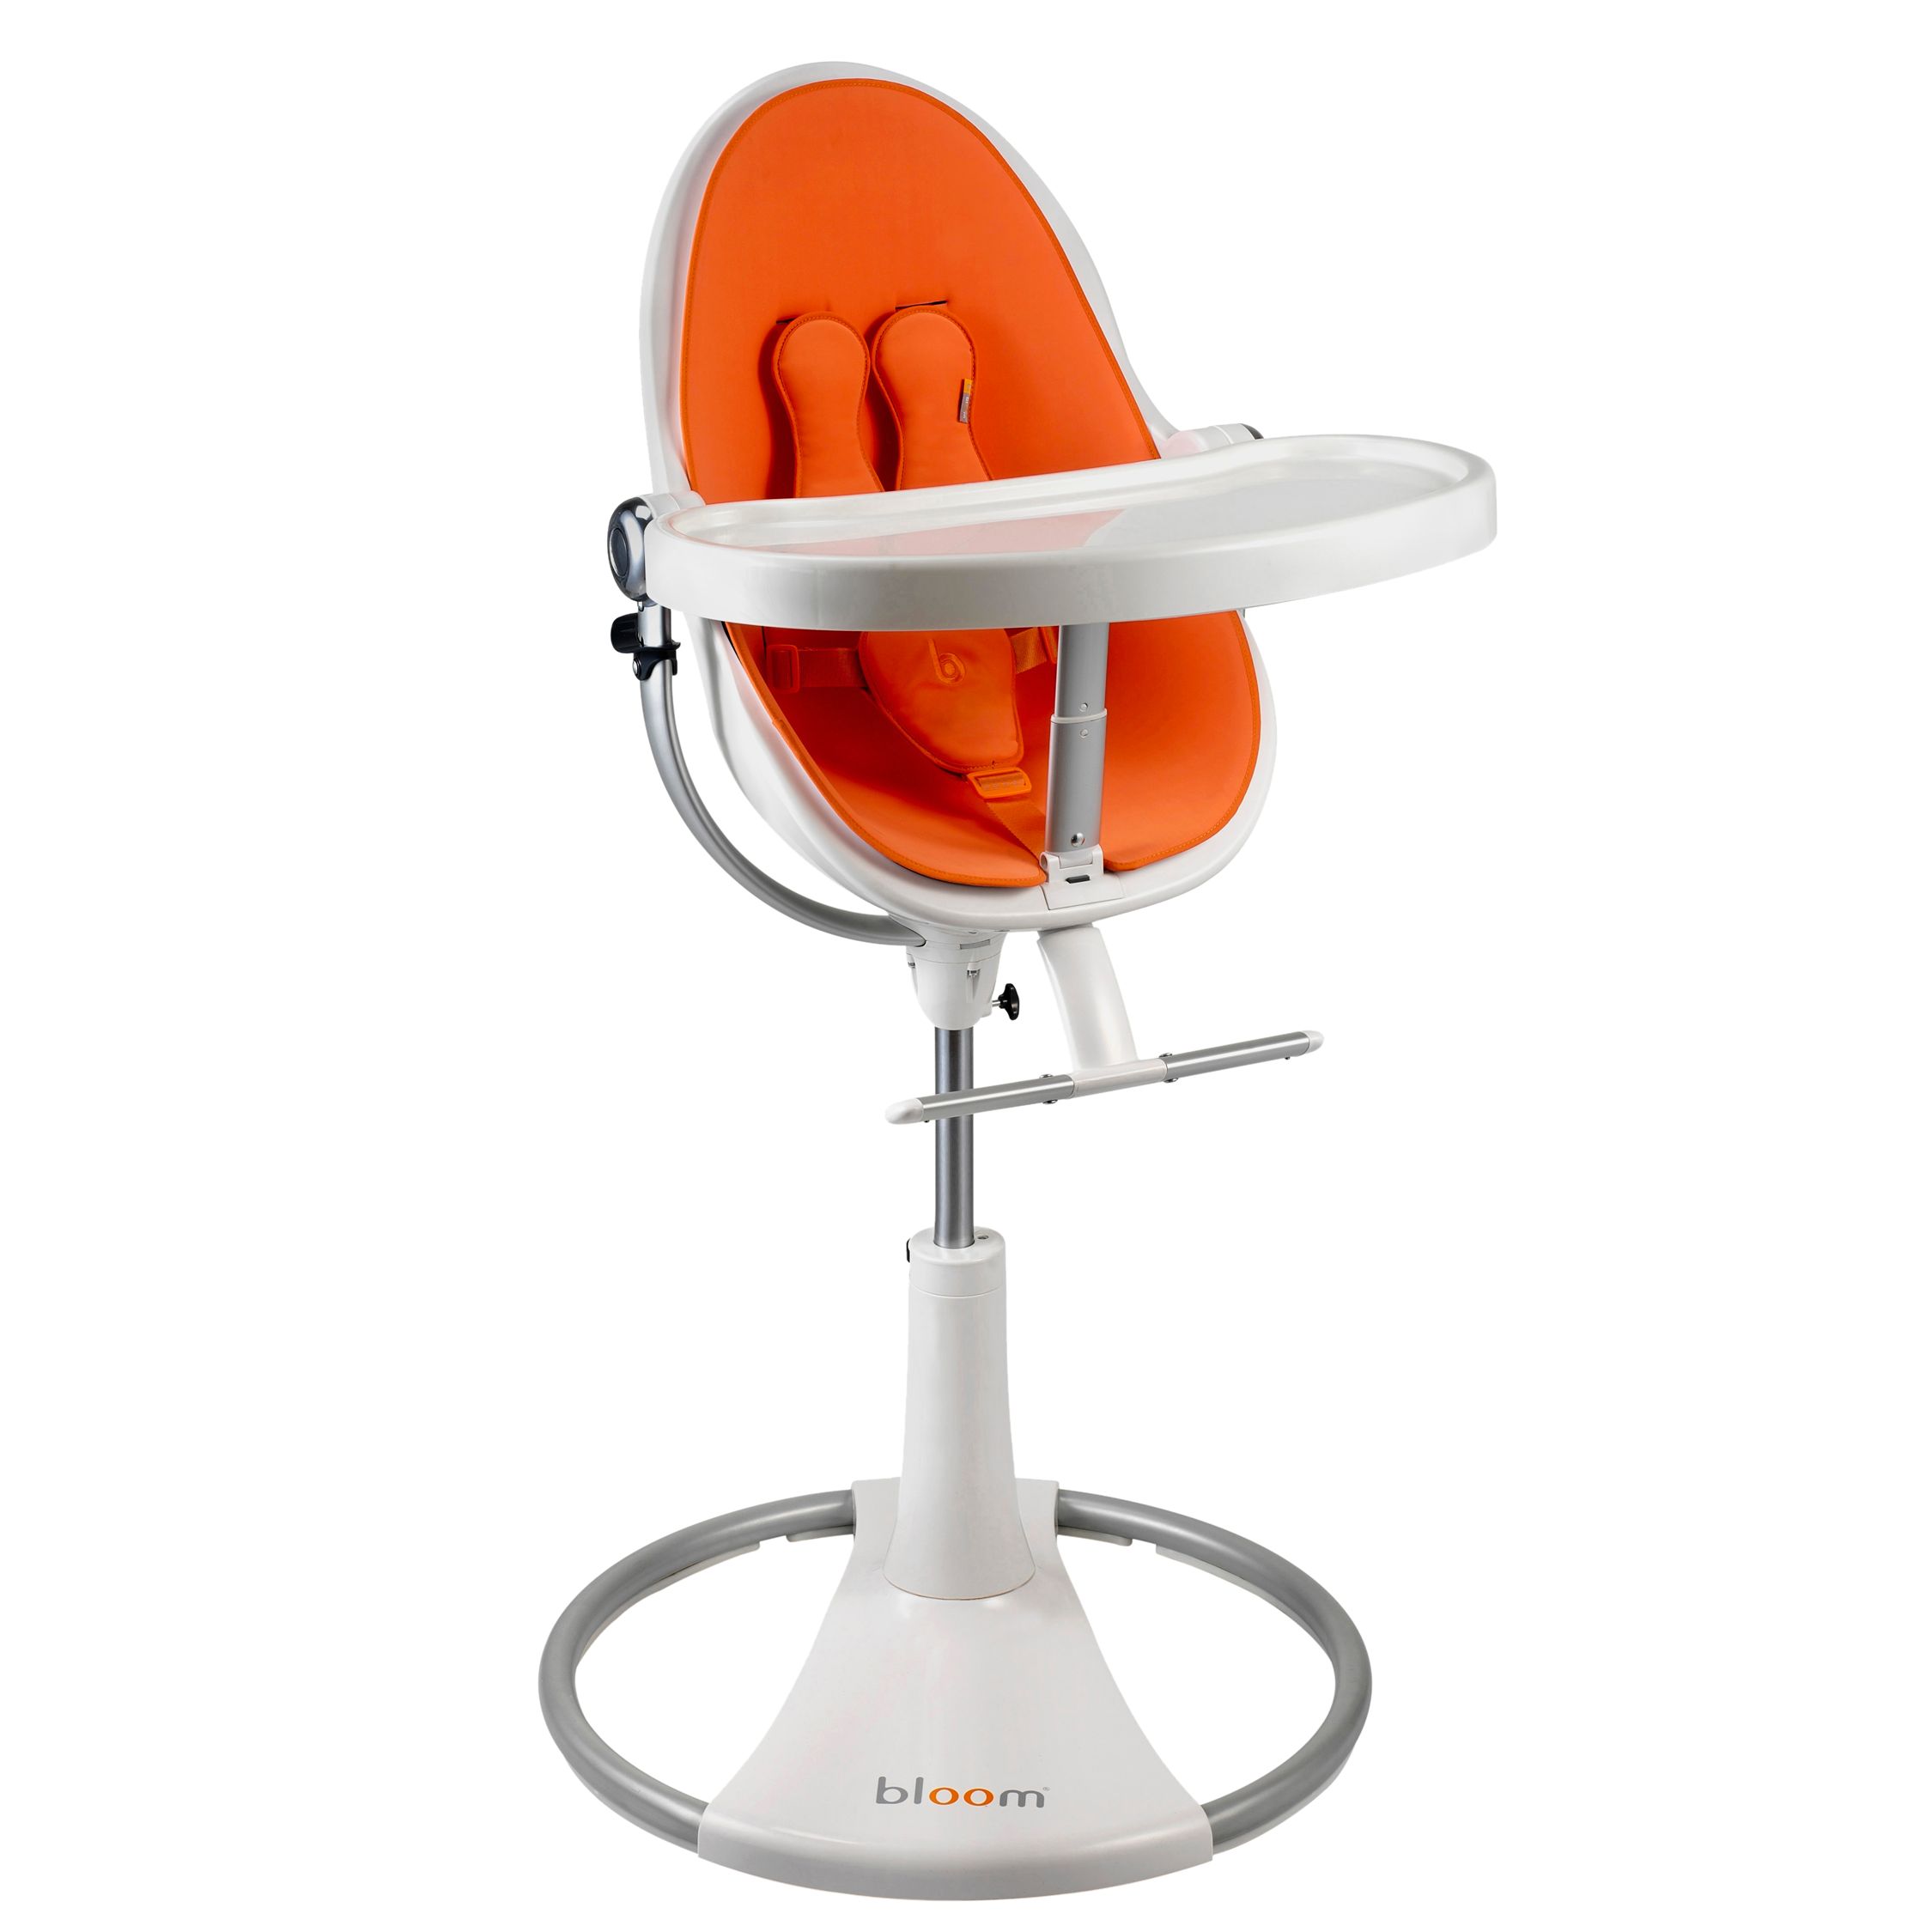 bloom Fresco Loft Contemporary Leatherette Baby Chair, Ivory White with Harvest Orange at John Lewis